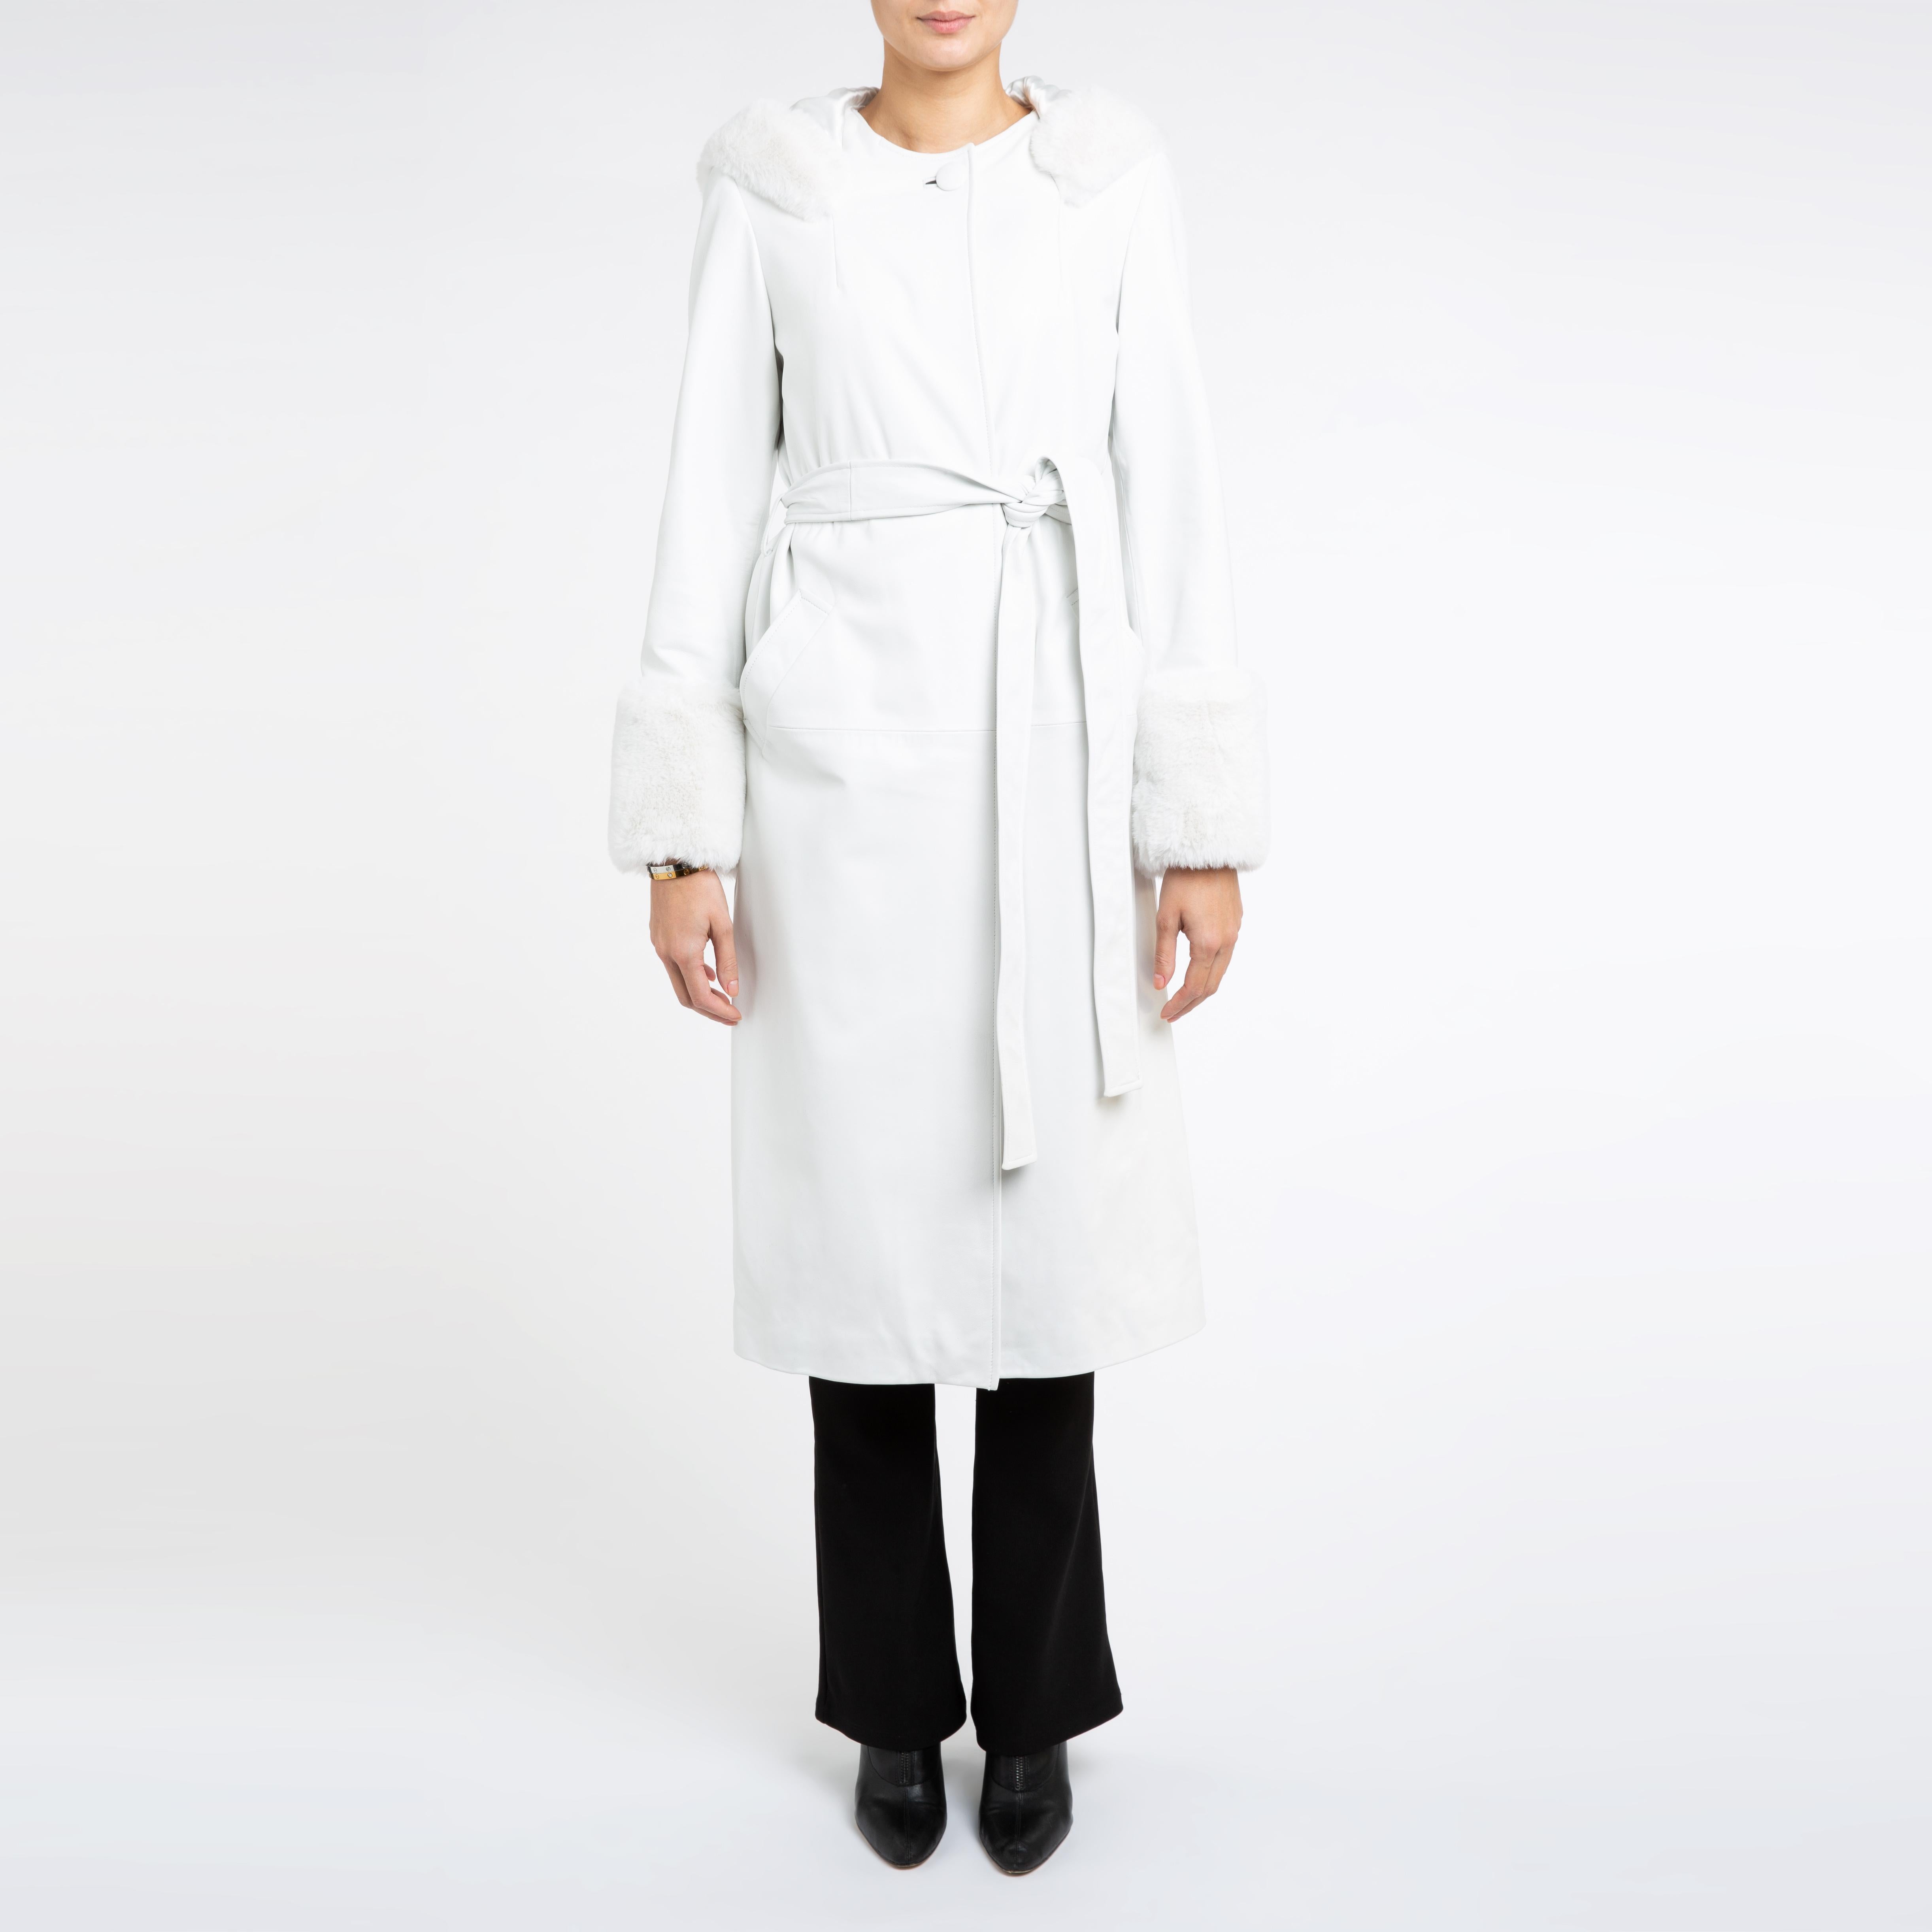 Women's Verheyen Aurora Hooded Leather Trench Coat in White with Faux Fur - Size uk 8 For Sale